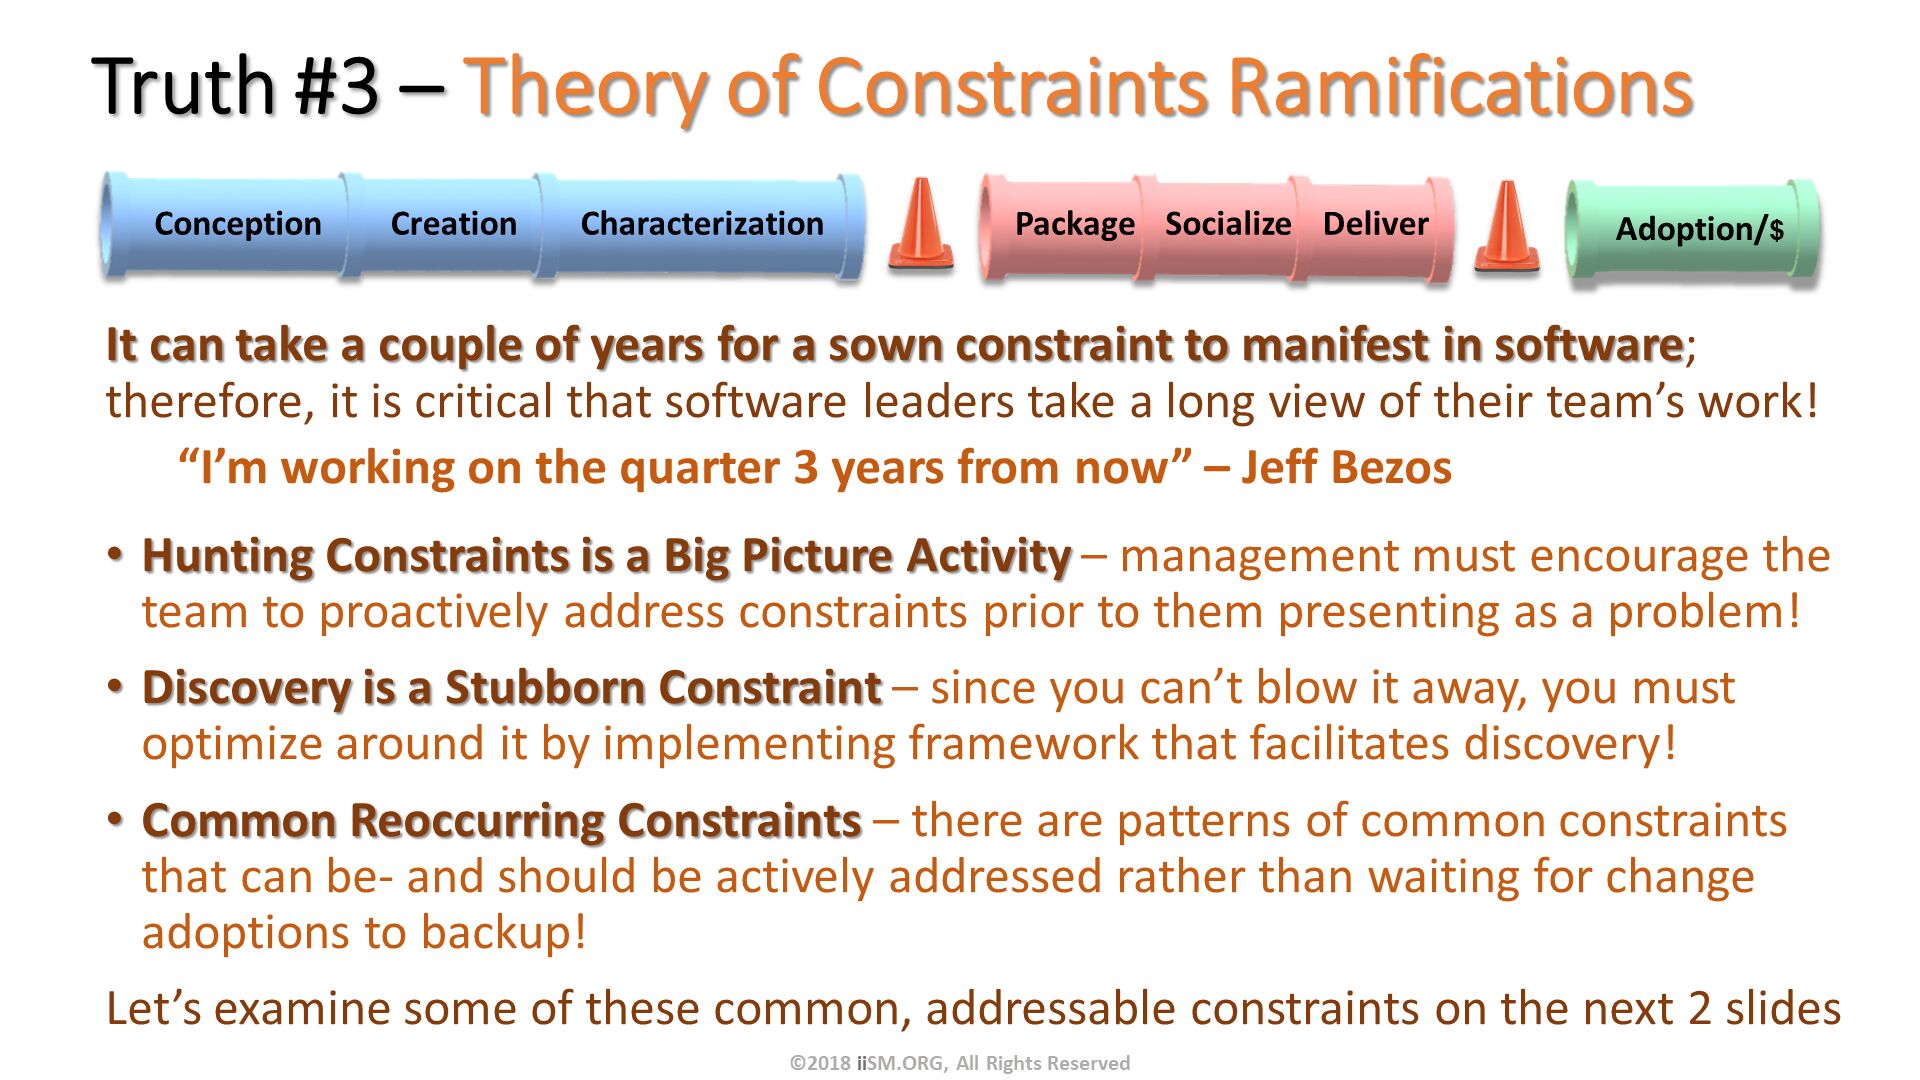 Truth #3 – Theory of Constraints Ramifications . It can take a couple of years for a sown constraint to manifest in software; therefore, it is critical that software leaders take a long view of their team’s work!
“I’m working on the quarter 3 years from now” – Jeff Bezos
Hunting Constraints is a Big Picture Activity – management must encourage the team to proactively address constraints prior to them presenting as a problem!
Discovery is a Stubborn Constraint – since you can’t blow it away, you must optimize around it by implementing framework that facilitates discovery!
Common Reoccurring Constraints – there are patterns of common constraints that can be- and should be actively addressed rather than waiting for change adoptions to backup!
Let’s examine some of these common, addressable constraints on the next 2 slides




. ©2018 iiSM.ORG, All Rights Reserved. 